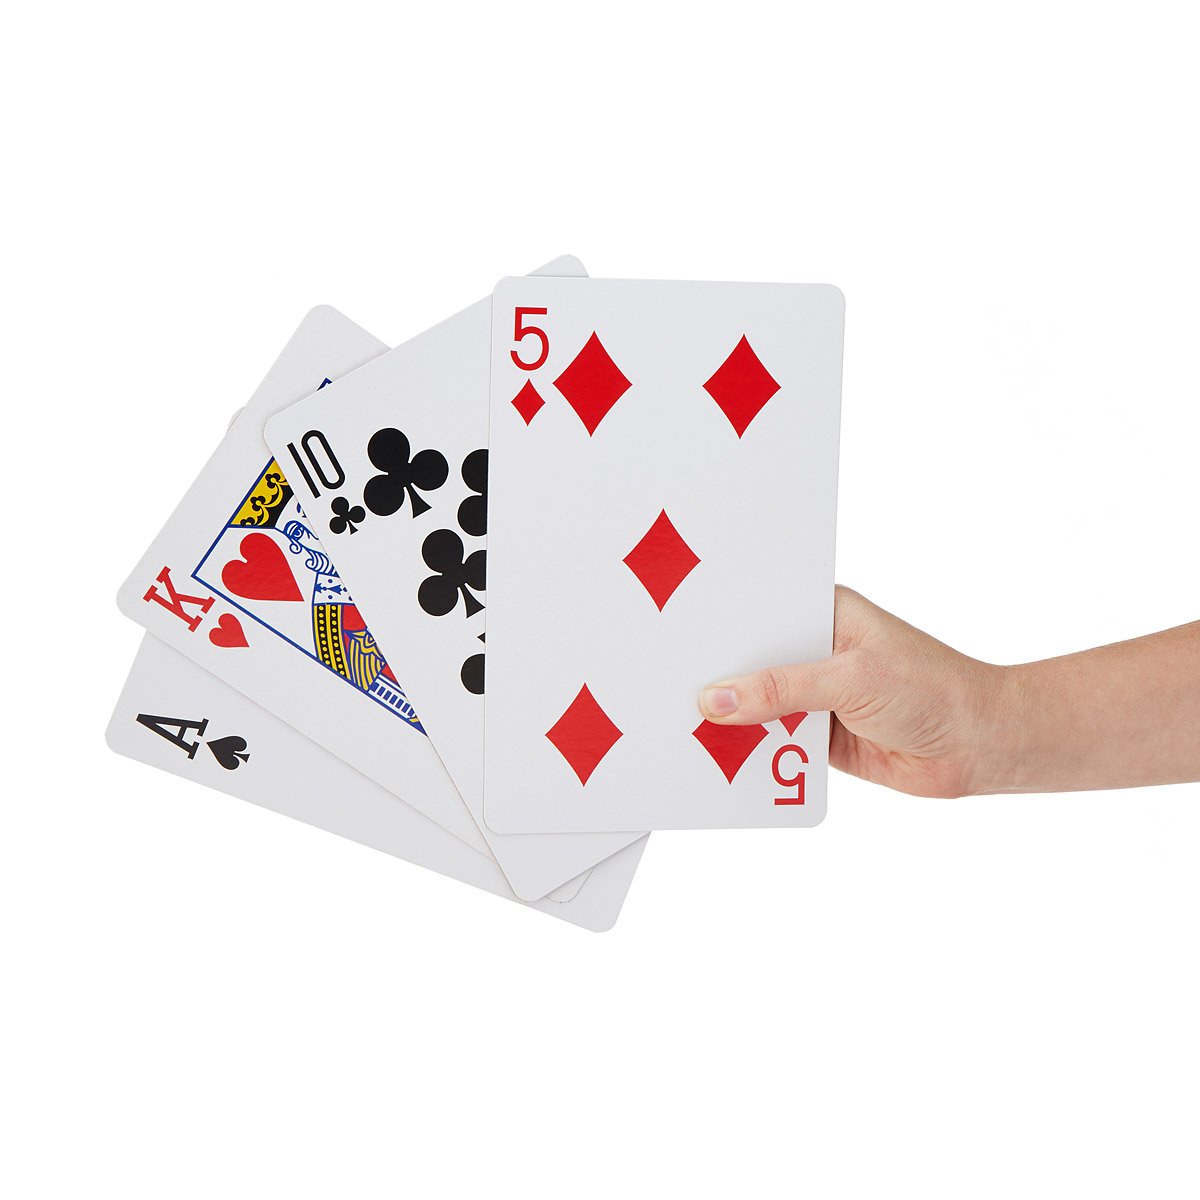 giant-playing-cards-jumbo-playing-cards-uncommongoods